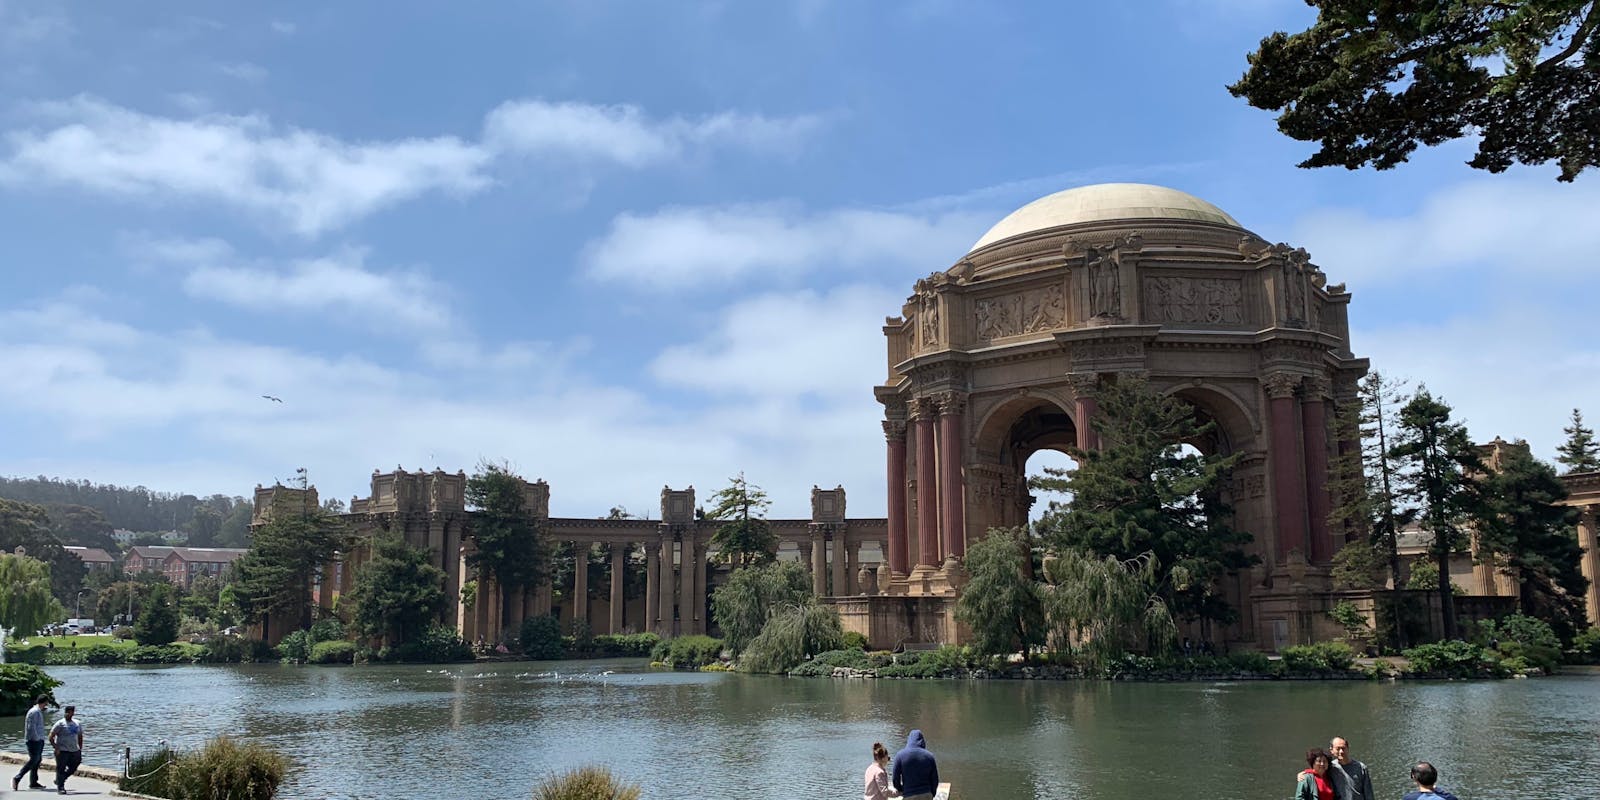 The Palace of Fine Arts, from across the lake.